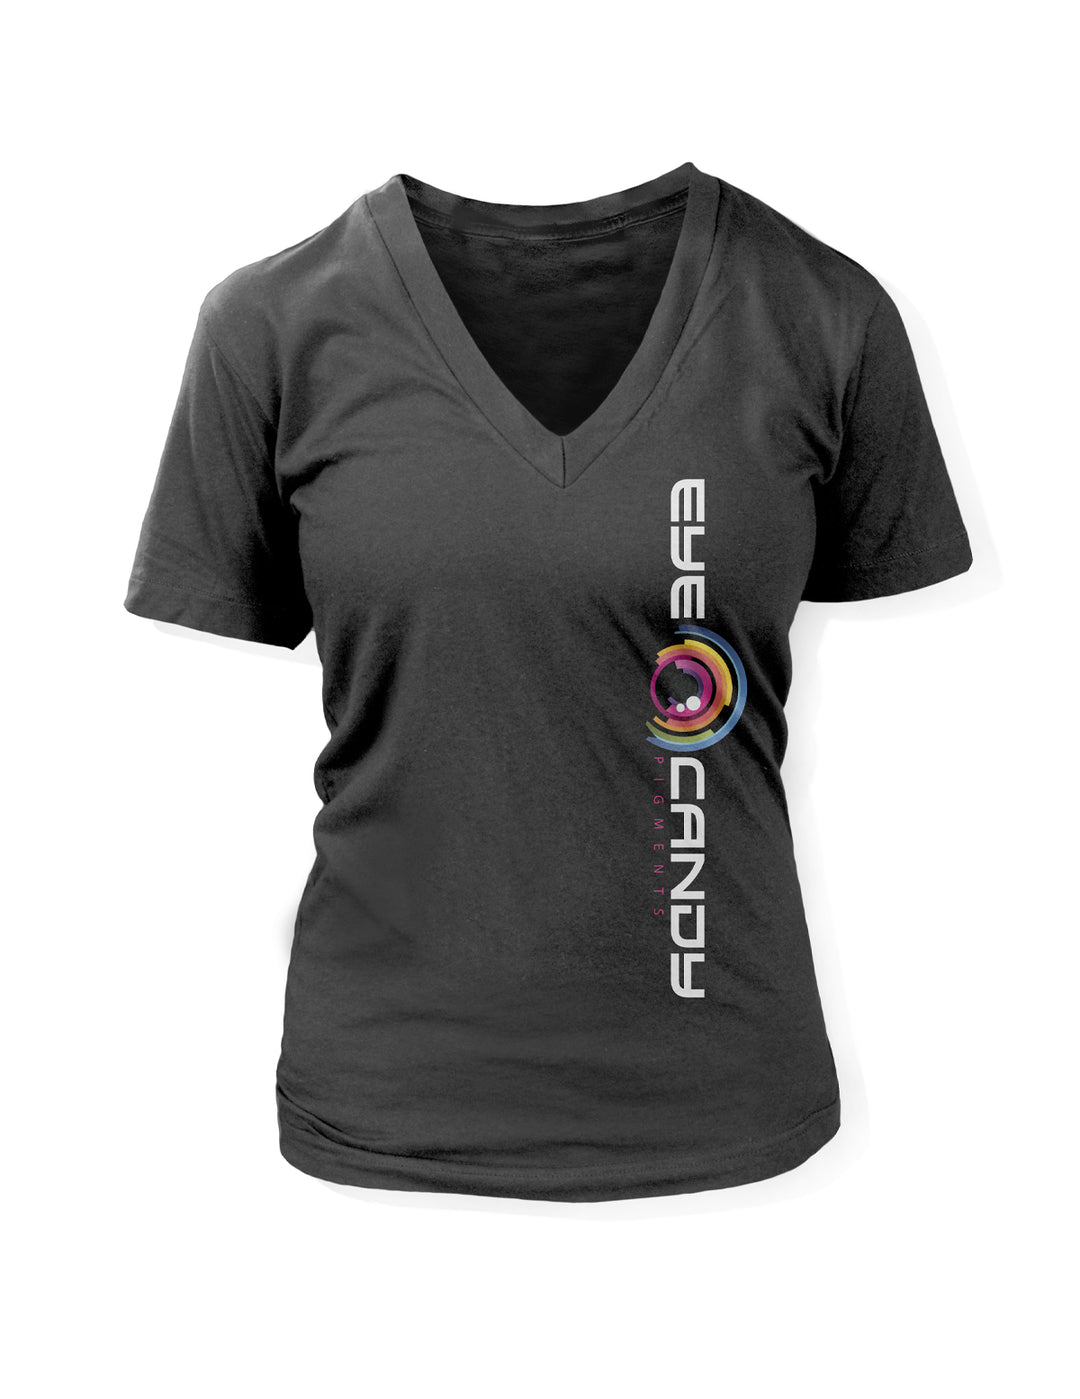 Women's V-Neck T-shirt - Available Now!